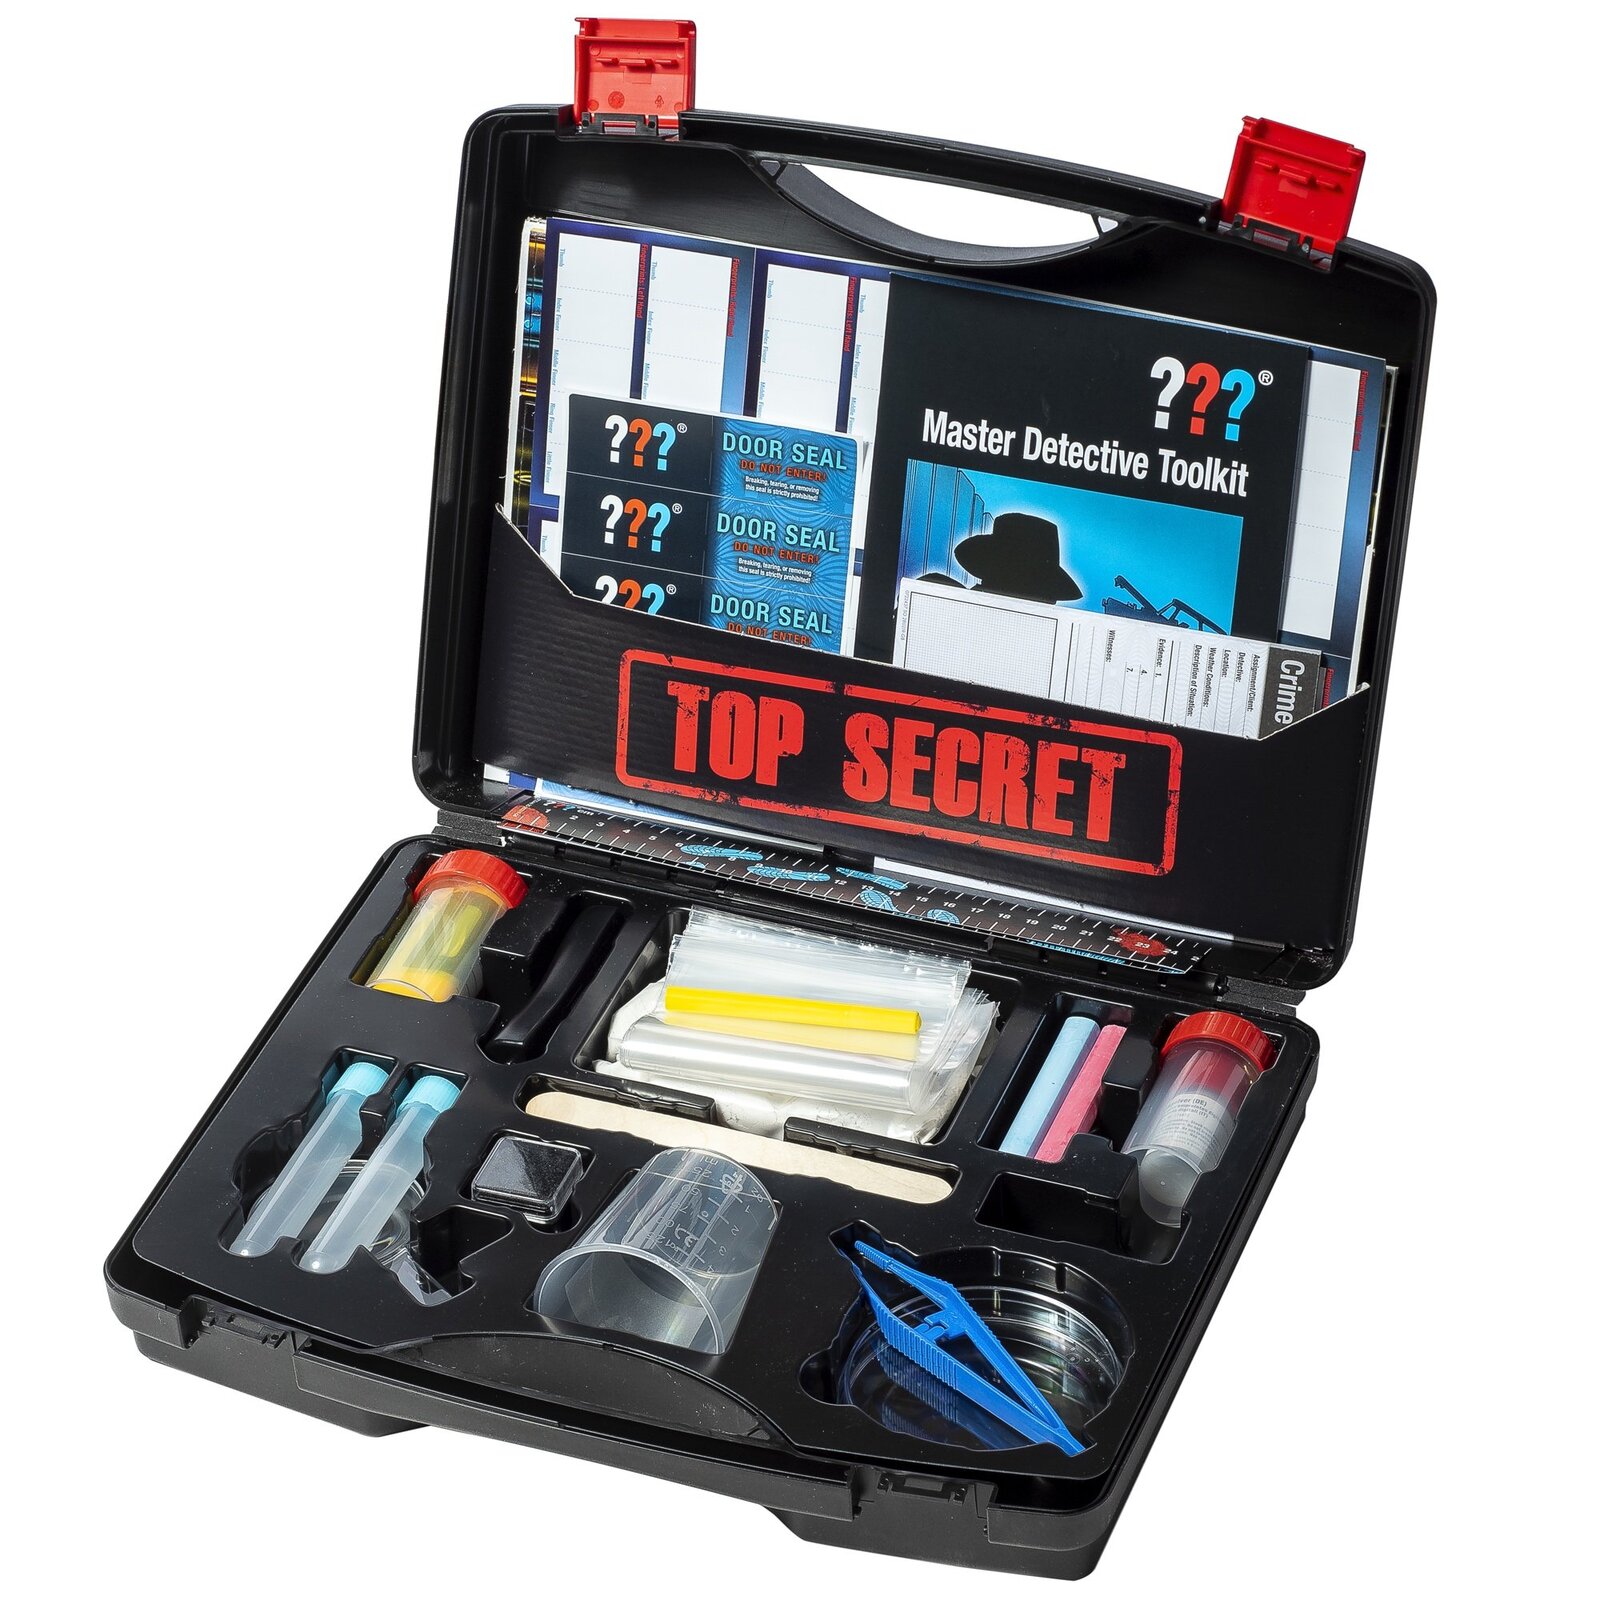 Master Detective Toolkit additional image